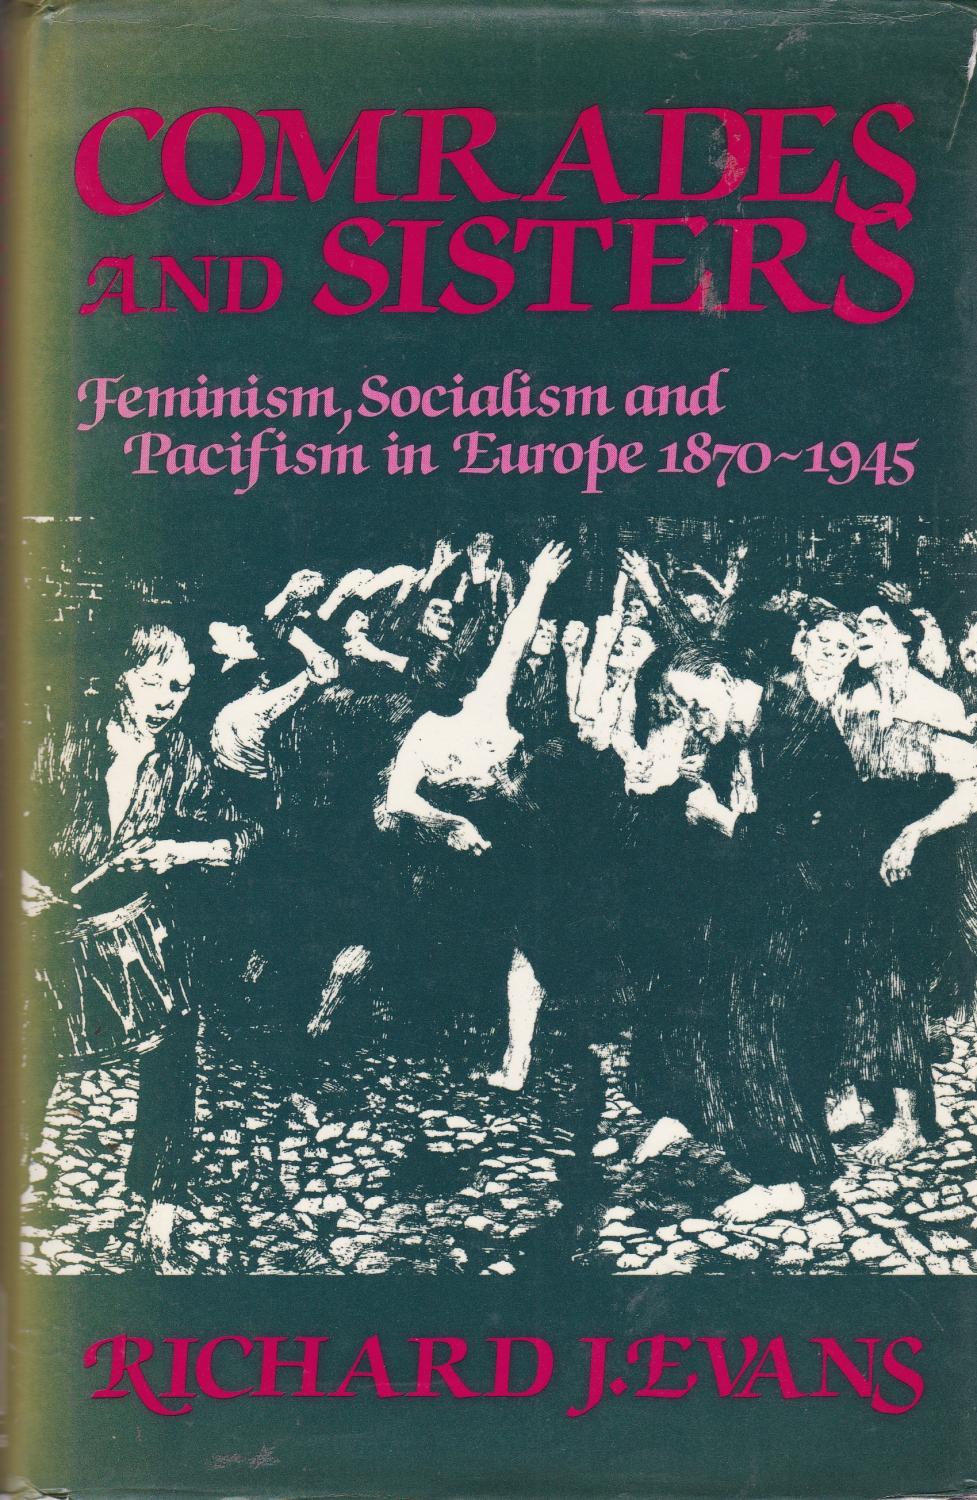 Comrades and Sisters: Feminism, Socialism and Pacifism in Europe 1870-1945